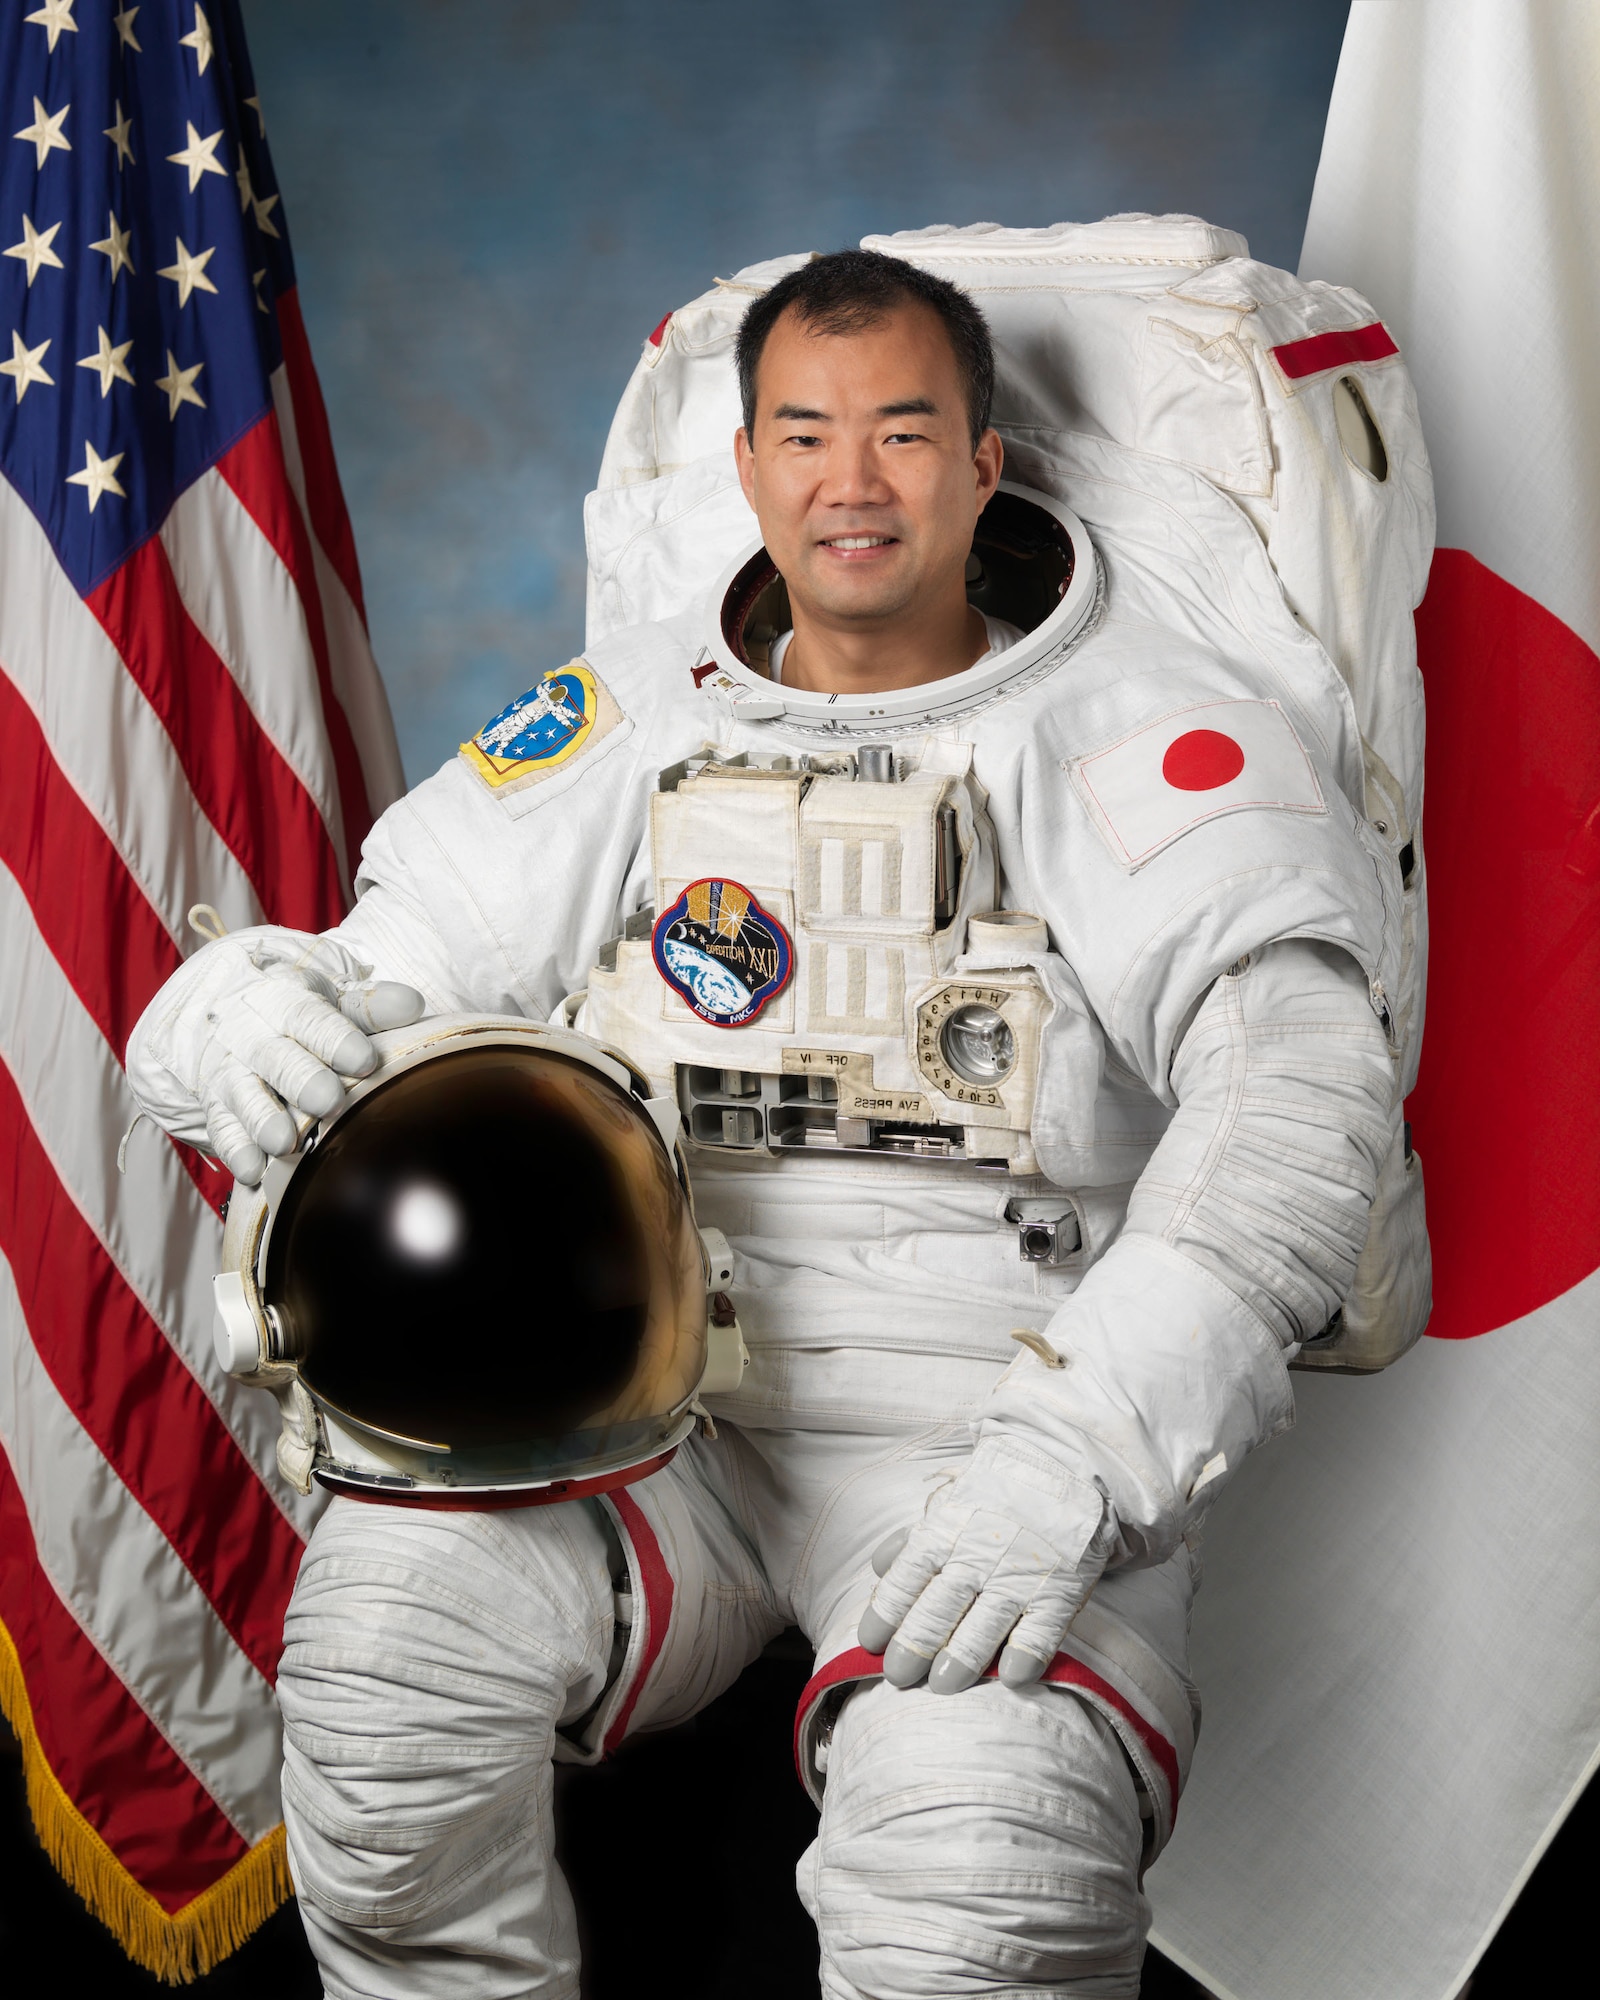 JOHNSON SPACE CENTER, Texas – Soichi Noguchi, Japan Aerospace Exploration Agency astronaut, is currently undergoing training and is set to travel to space alongside NASA astronauts Col. Michael Hopkins, U.S. Air Force, Cmdr. Victor Glover, U.S. Navy, and Shannon Walker, for the Crew-1 mission, tentatively scheduled for August 2020. Noguchi shared details on his training in preparation for Crew-1 during a briefing broadcasted to 50th Wing Staff Agencies Schriever Airmen, April 17. (Johnson Space Center courtesy photo)